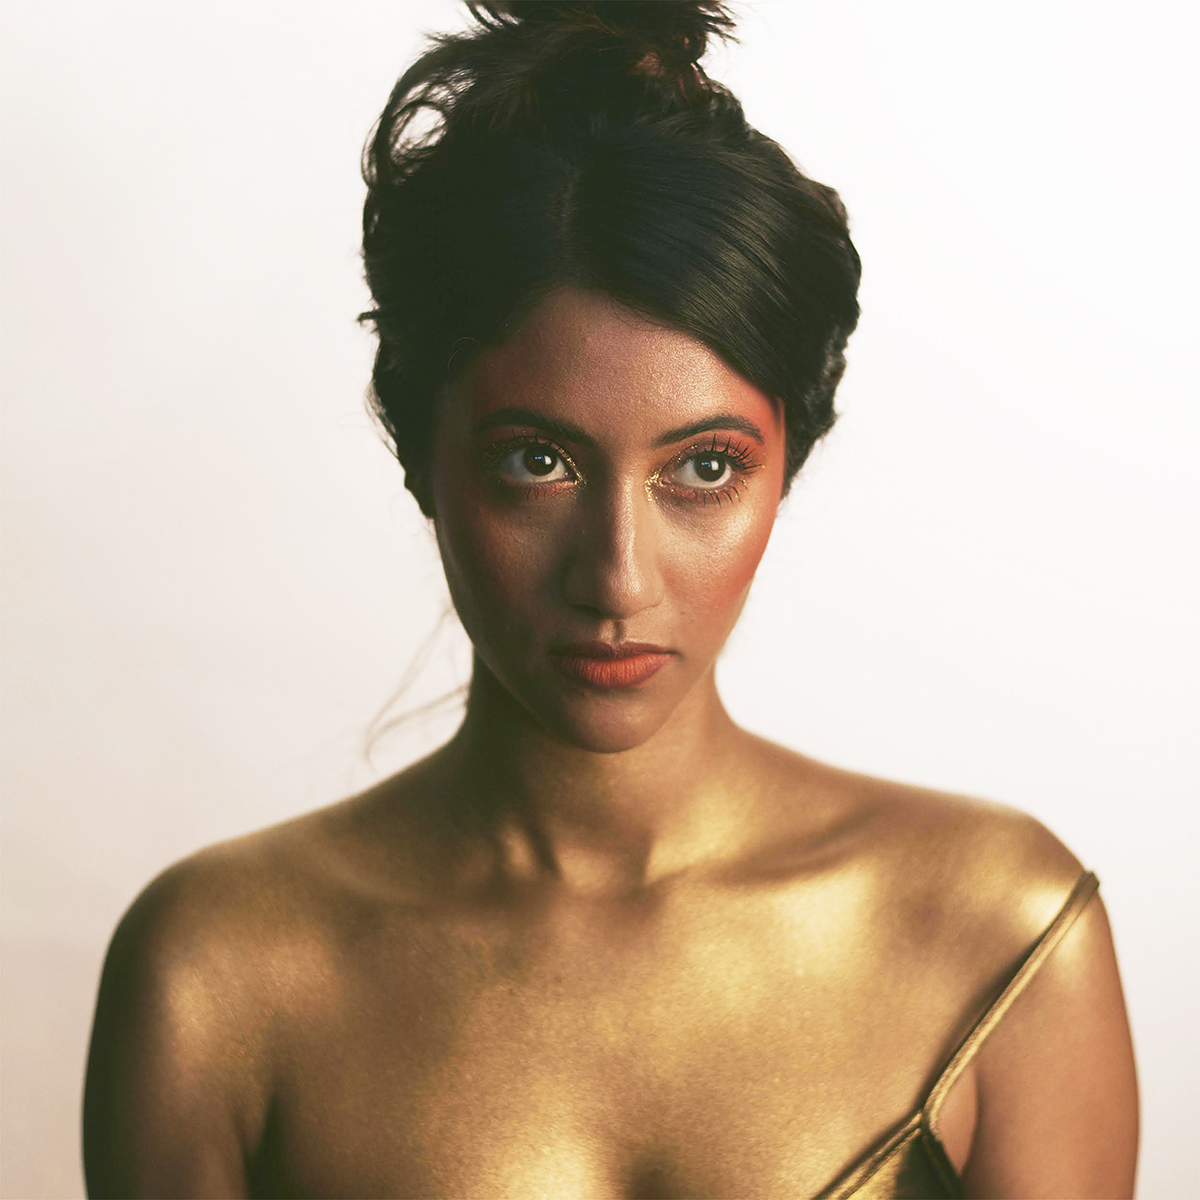 Songs for the Other: Priya Darshini on Her Grammy Nomination